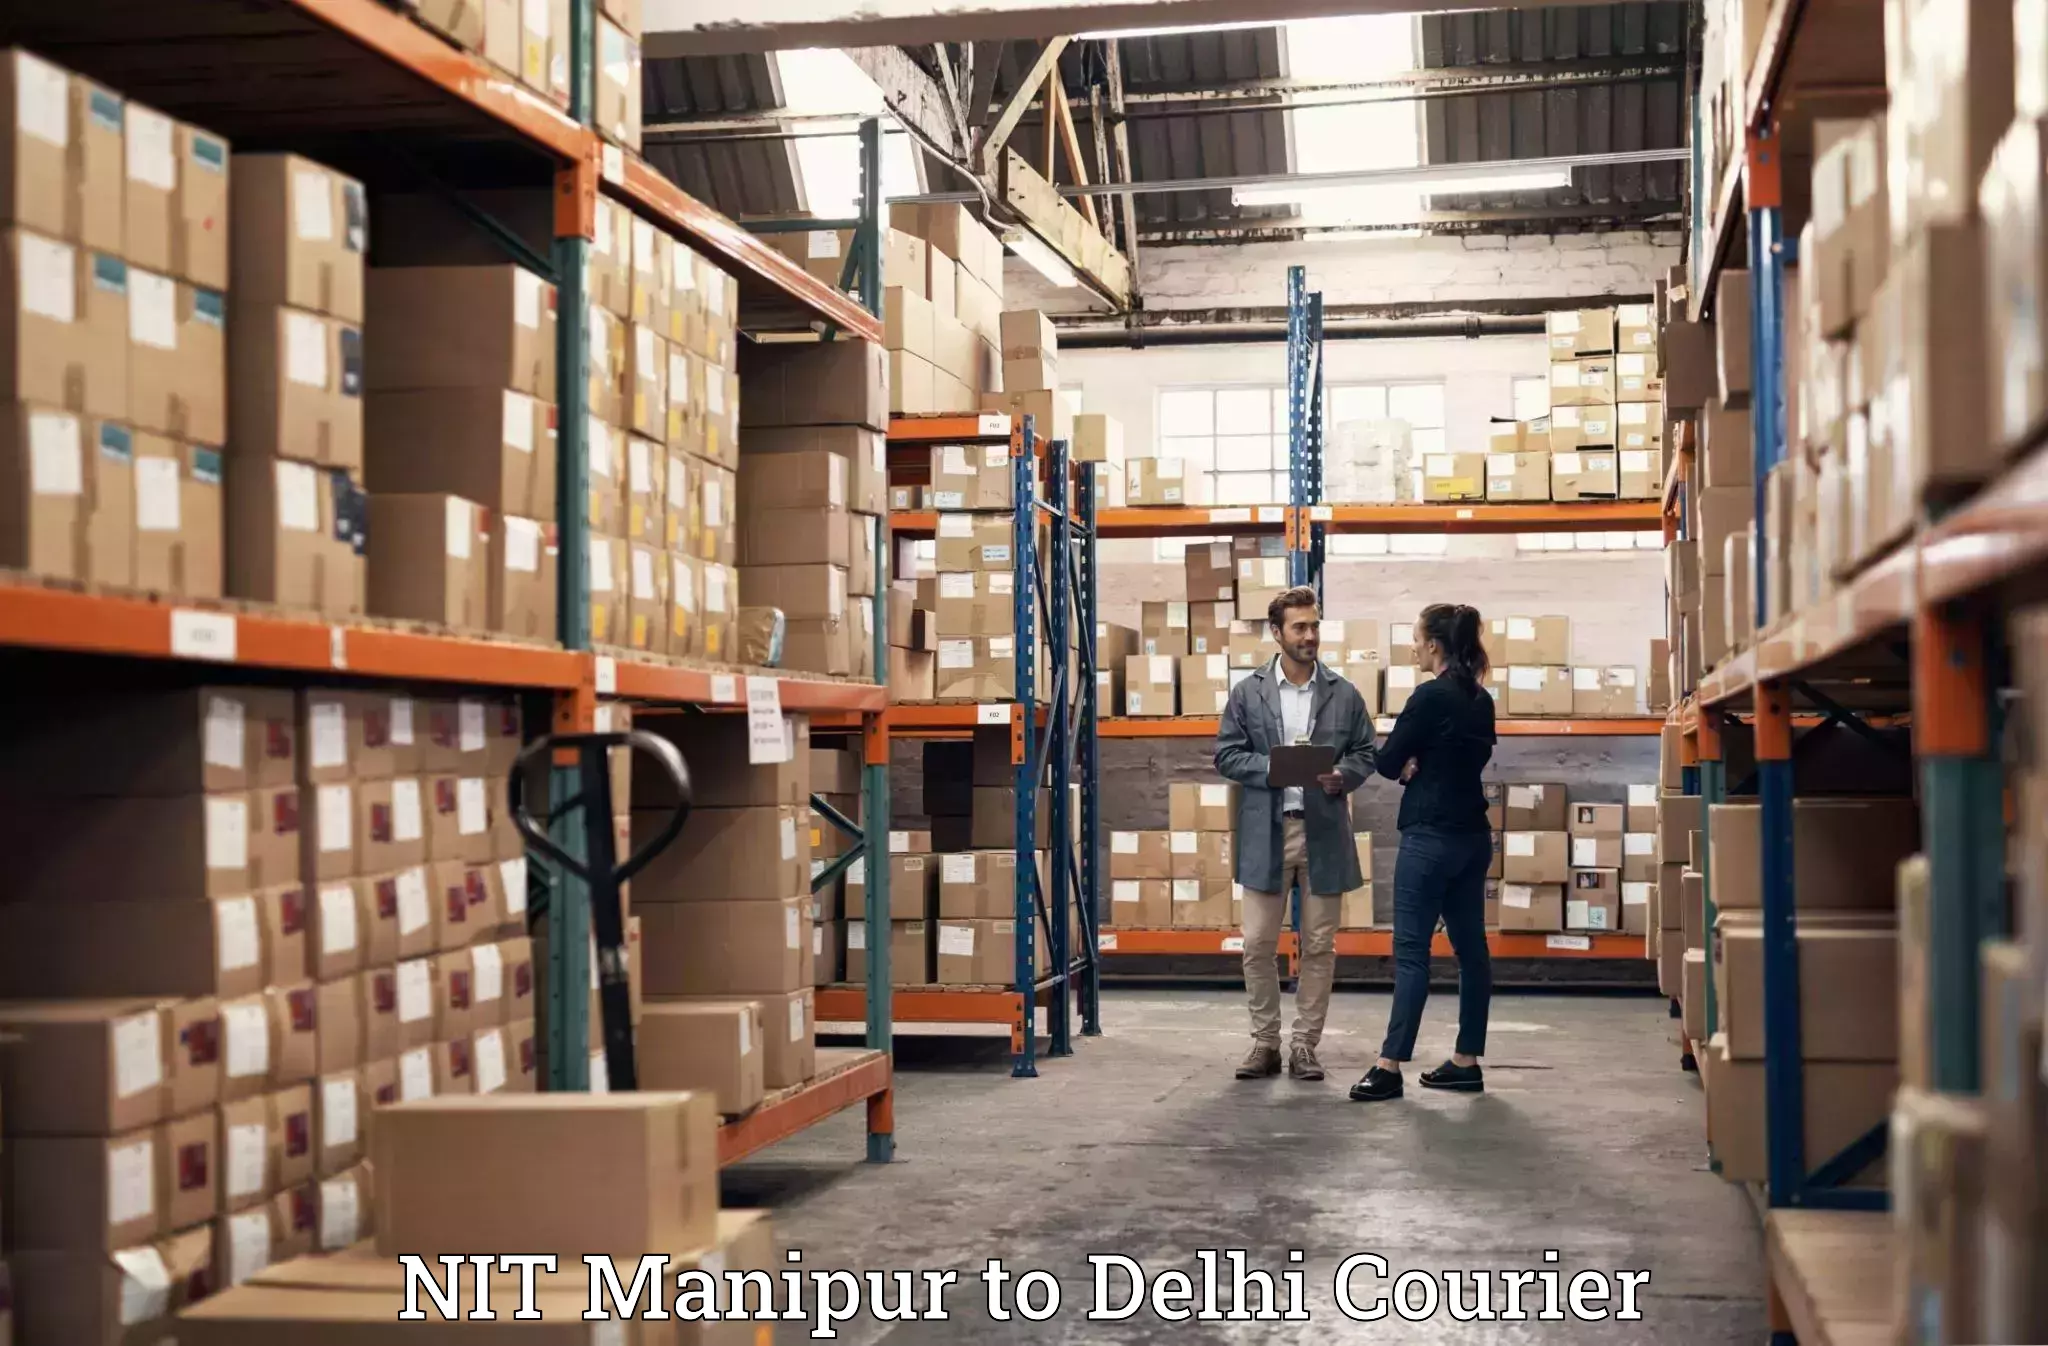 Personal effects shipping in NIT Manipur to NCR